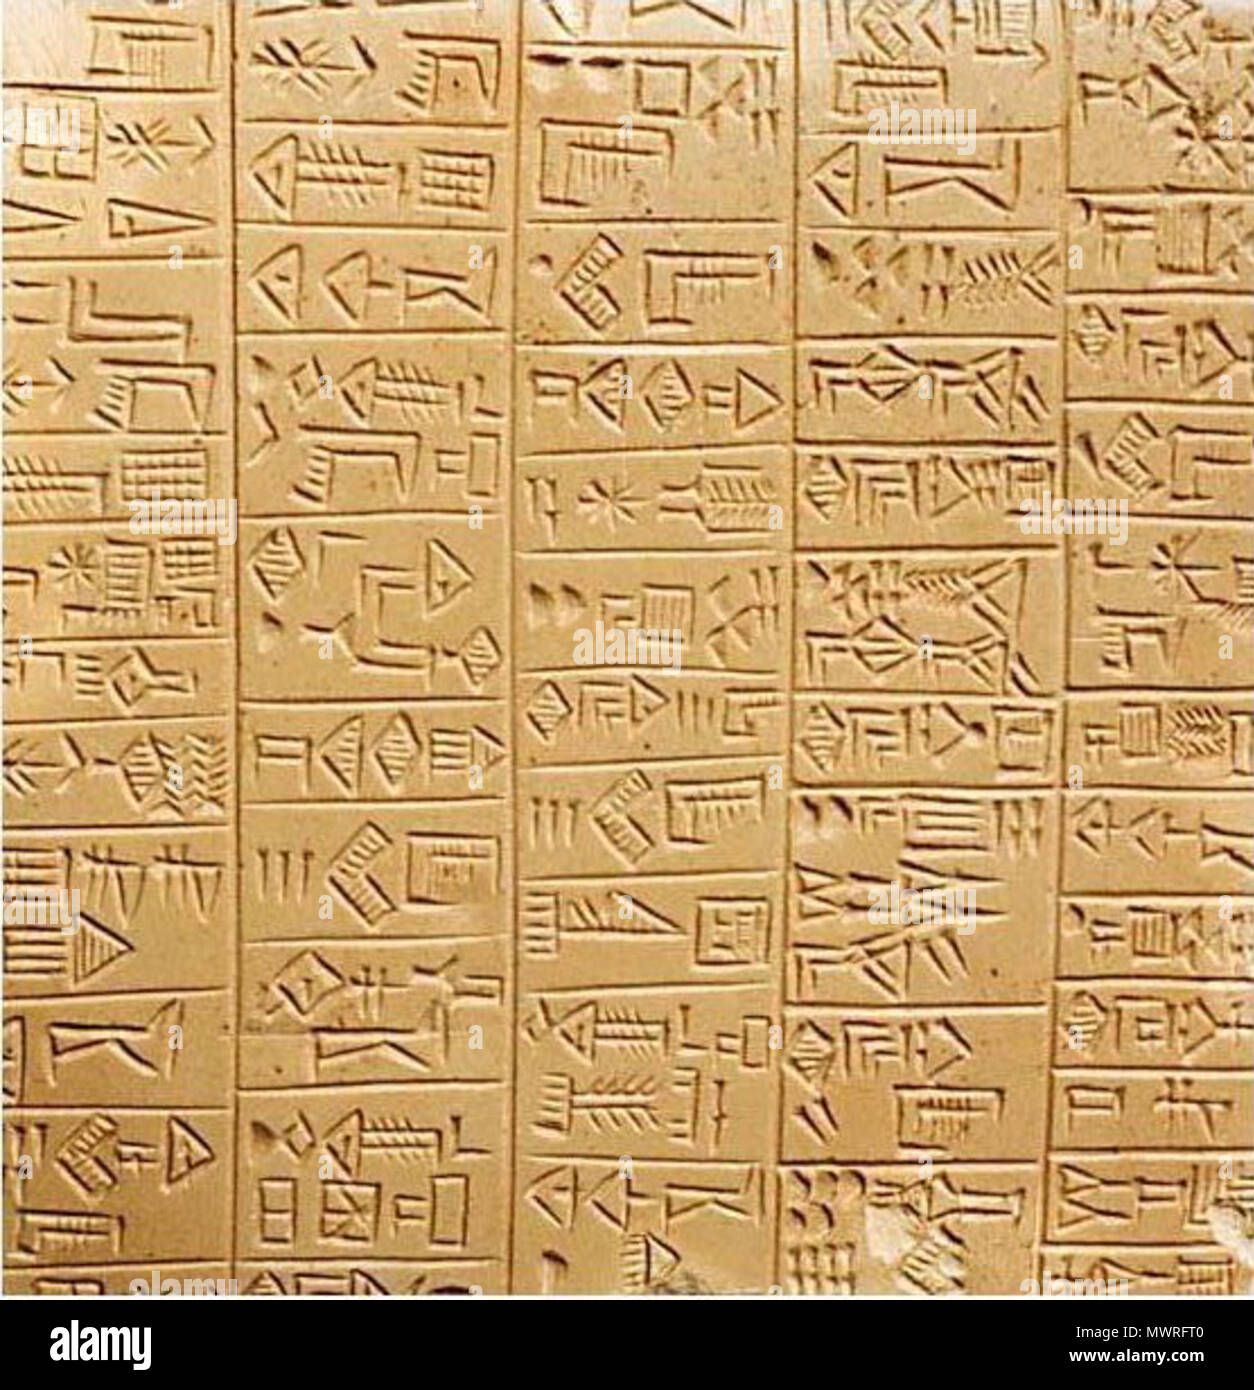 . English: Schøyen Collection MS 3029. Sumerian inscription on a creamy stone plaque, 9.2 x 9.2 x 1.2 cm, 6+6 columns, 120 compartments of archaic monumental cuneiform script by an expert scribe. The image is a detail, showing about half of one face of the plaque. The text is a list of 'gifts from the High and Mighty of Adab to the High Priestess, on the occasion of her election to the temple'. 26th century BC. Unknown 581 Sumerian 26th c Adab Stock Photo